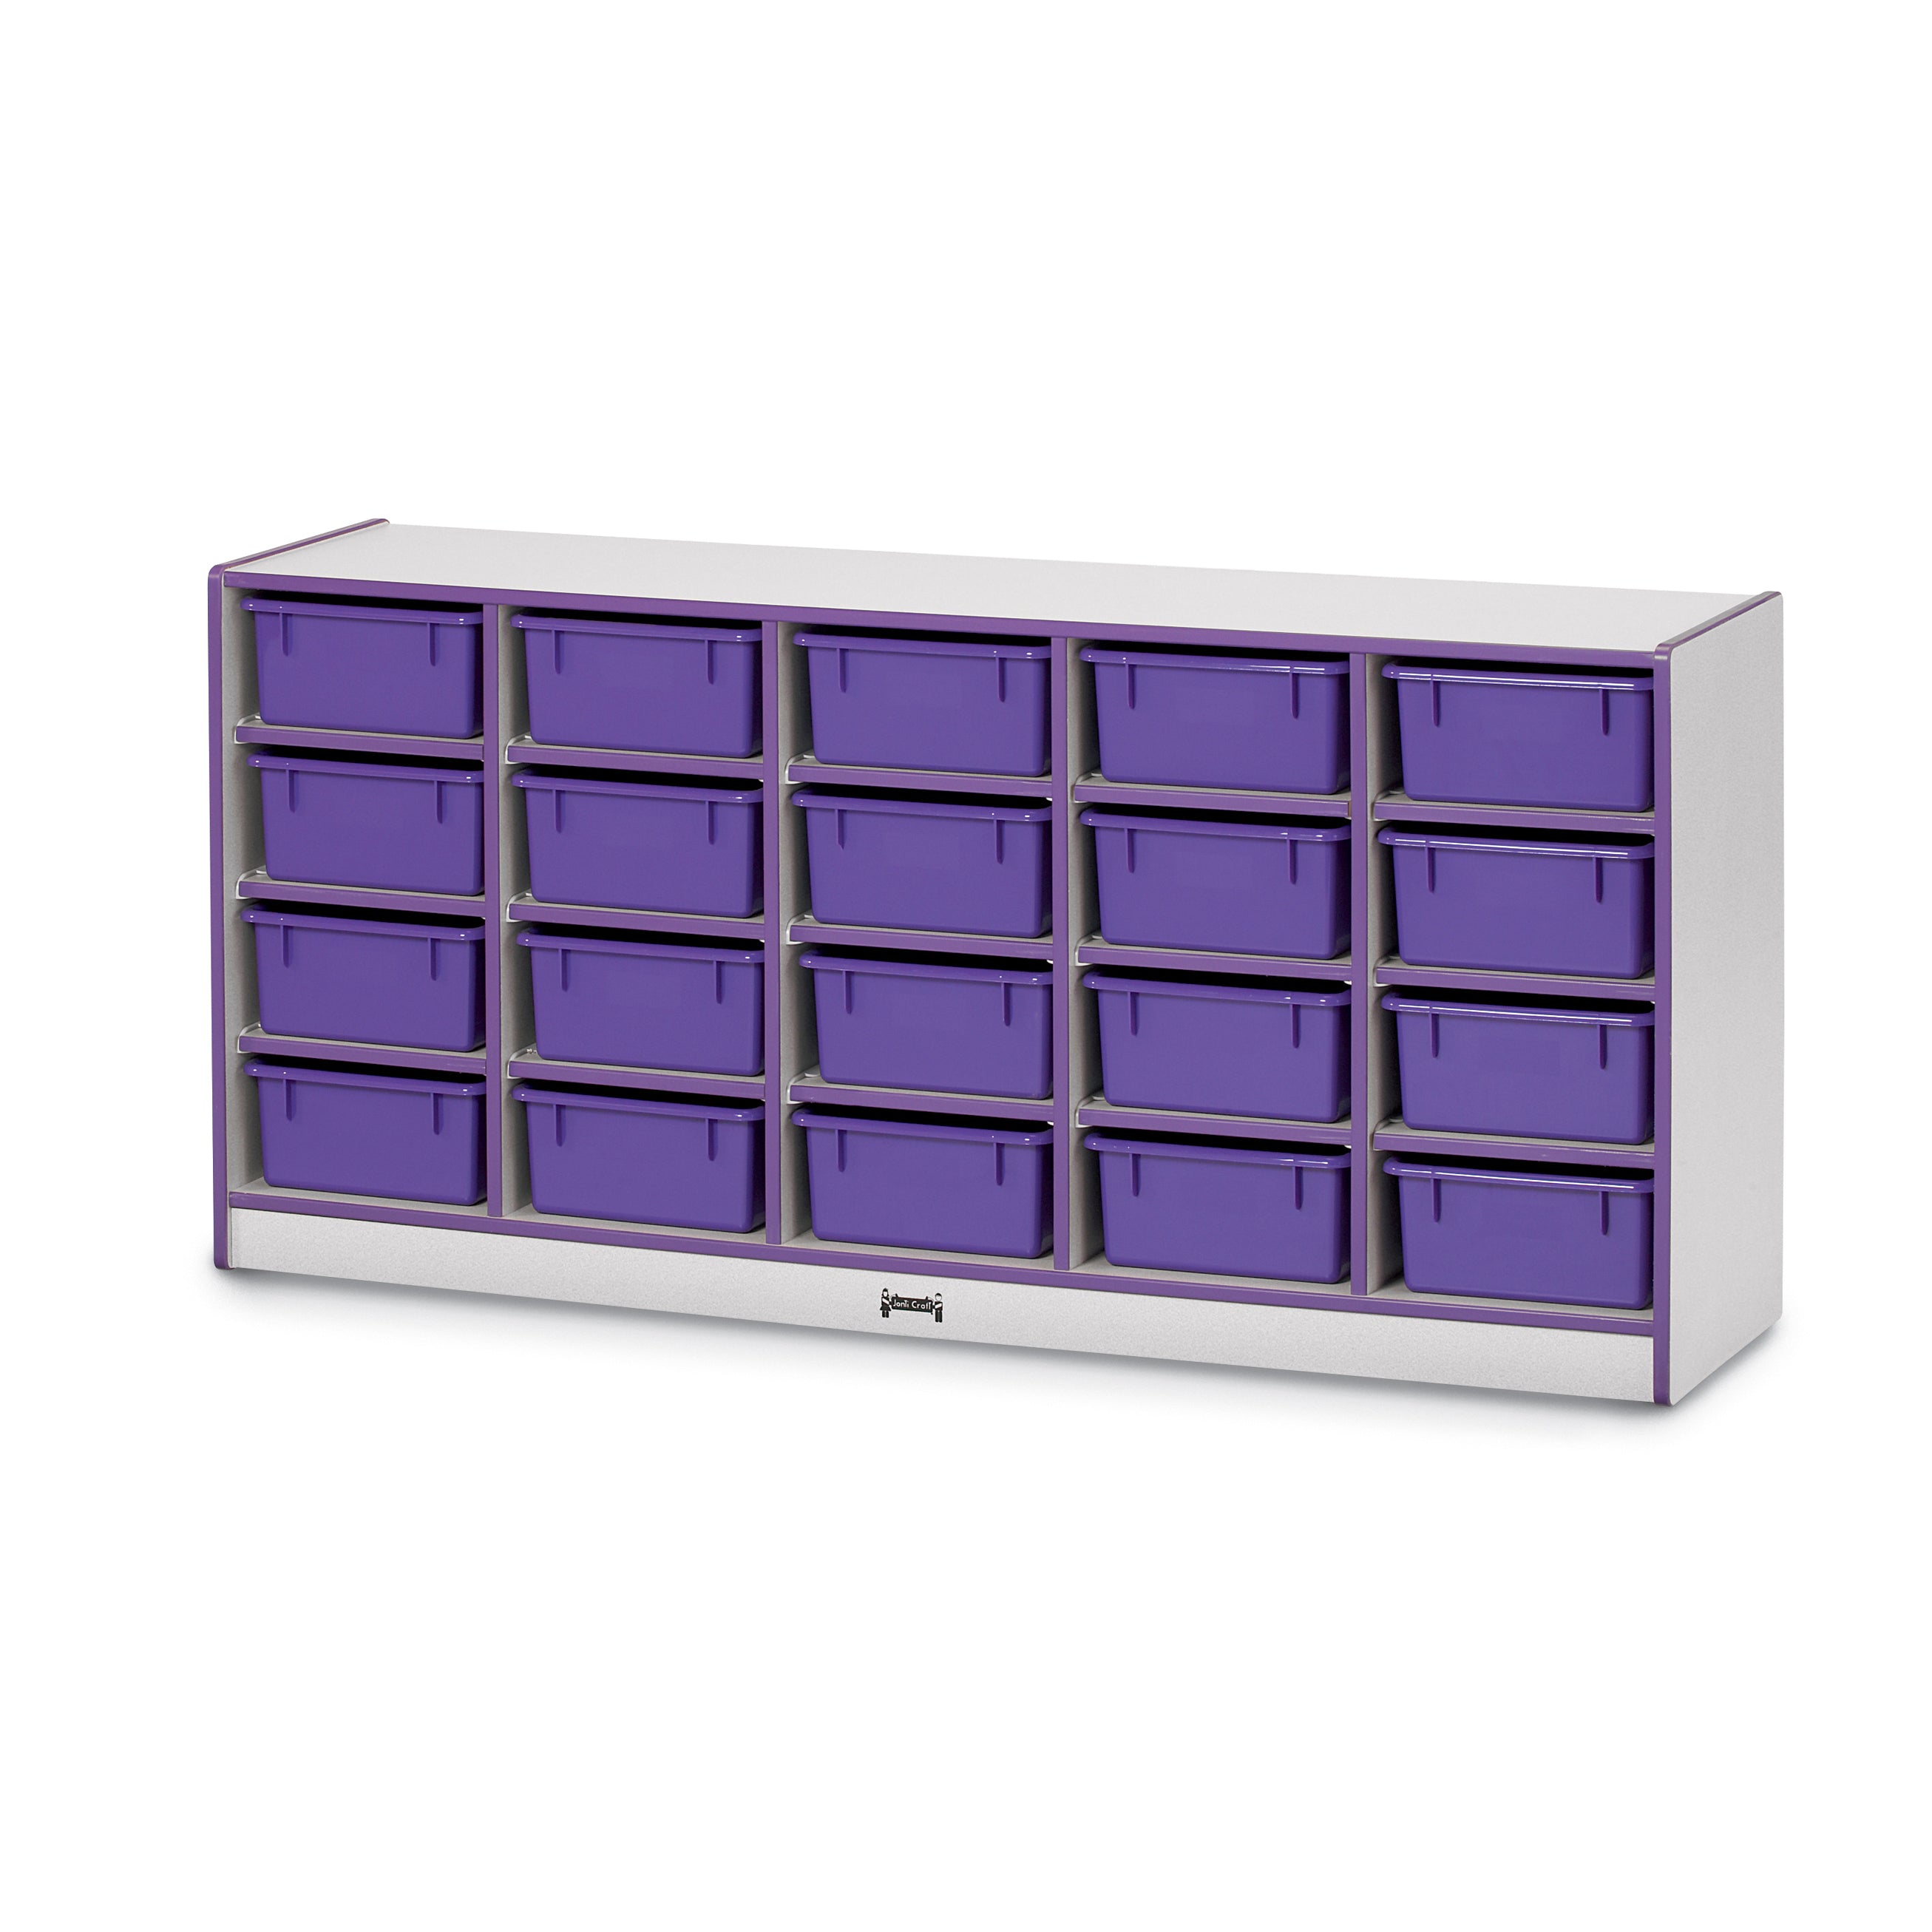 4021JCWW004, Rainbow Accents 20 Tub Mobile Storage - with Tubs - Purple